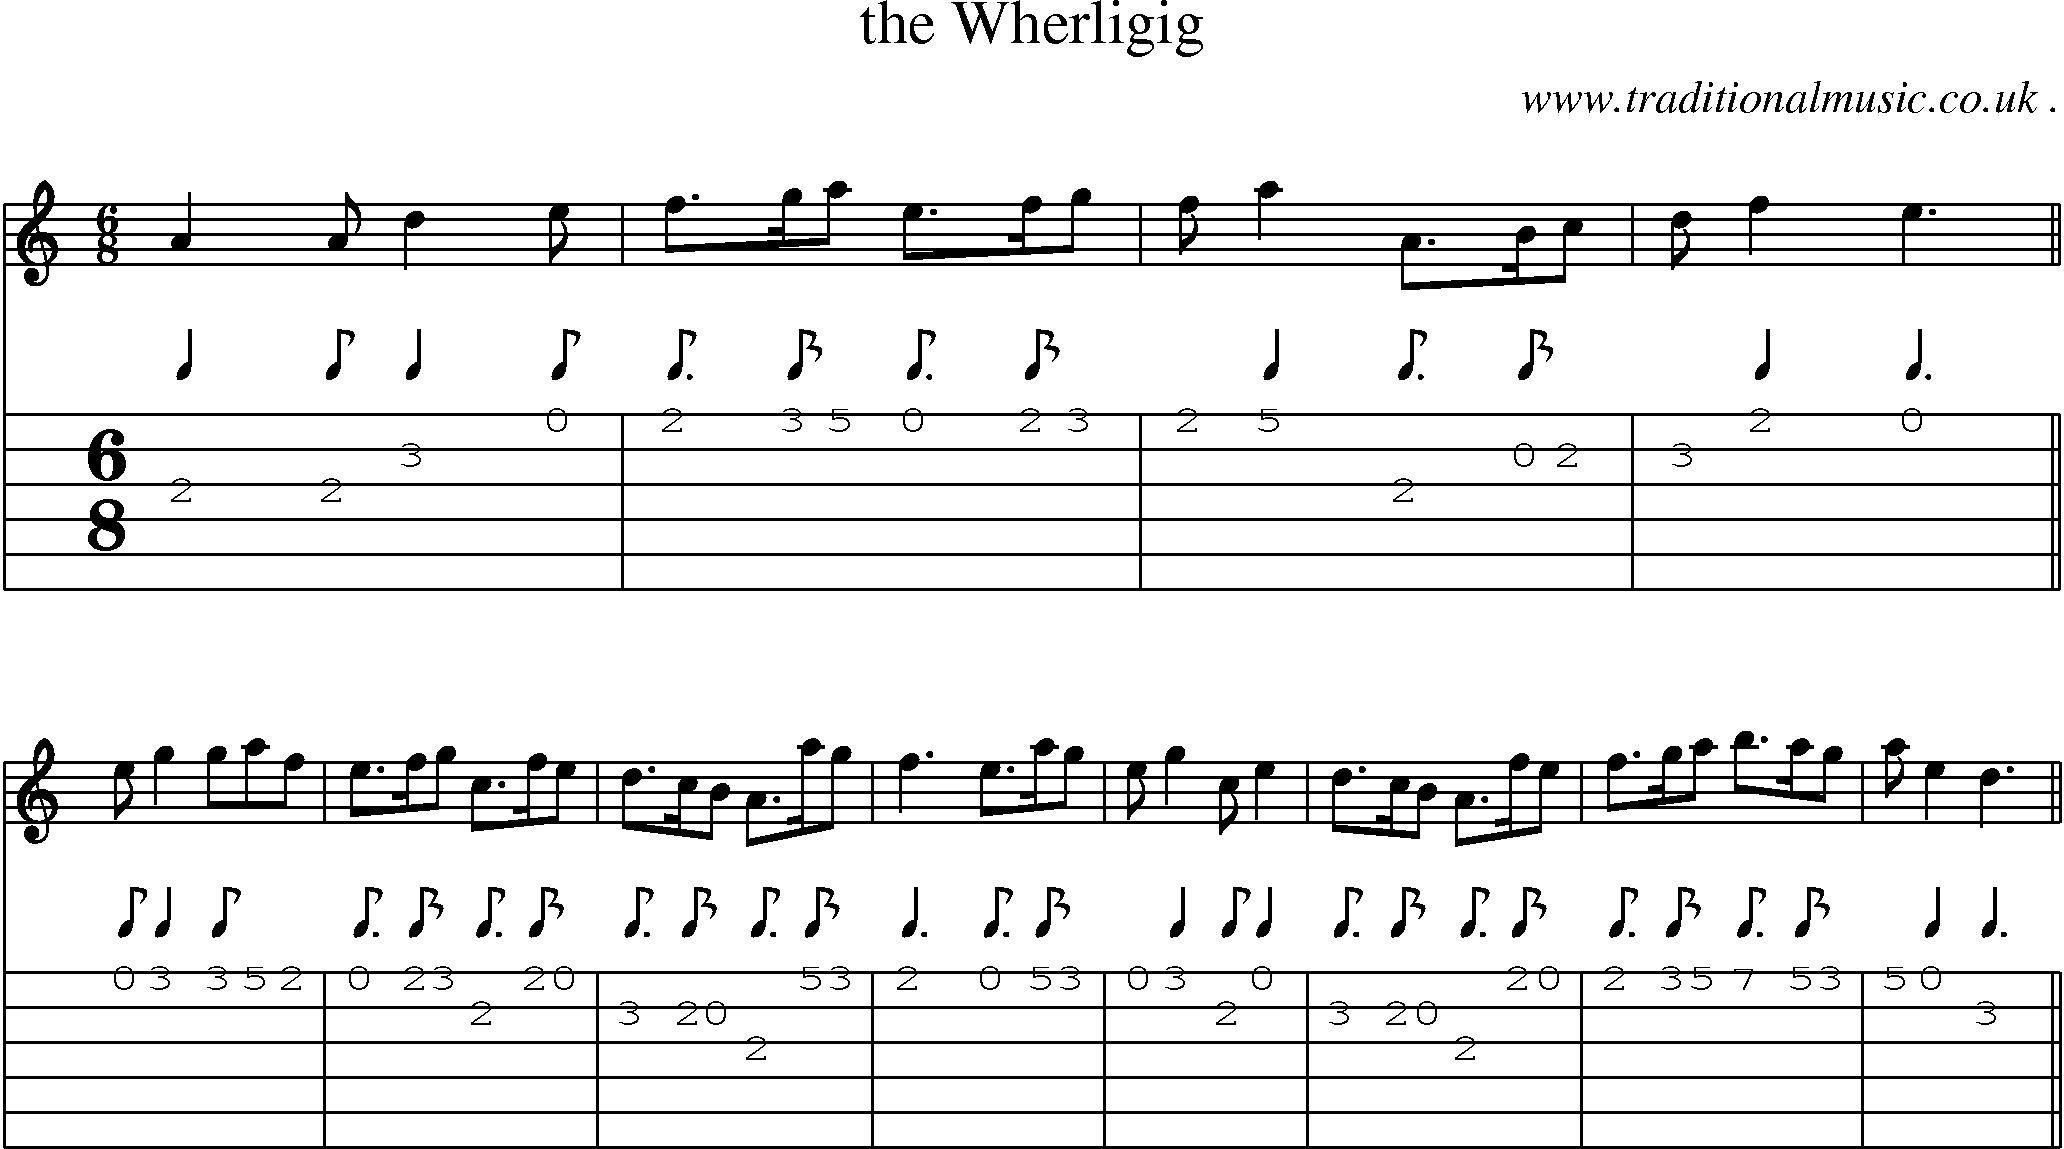 Sheet-music  score, Chords and Guitar Tabs for The Wherligig